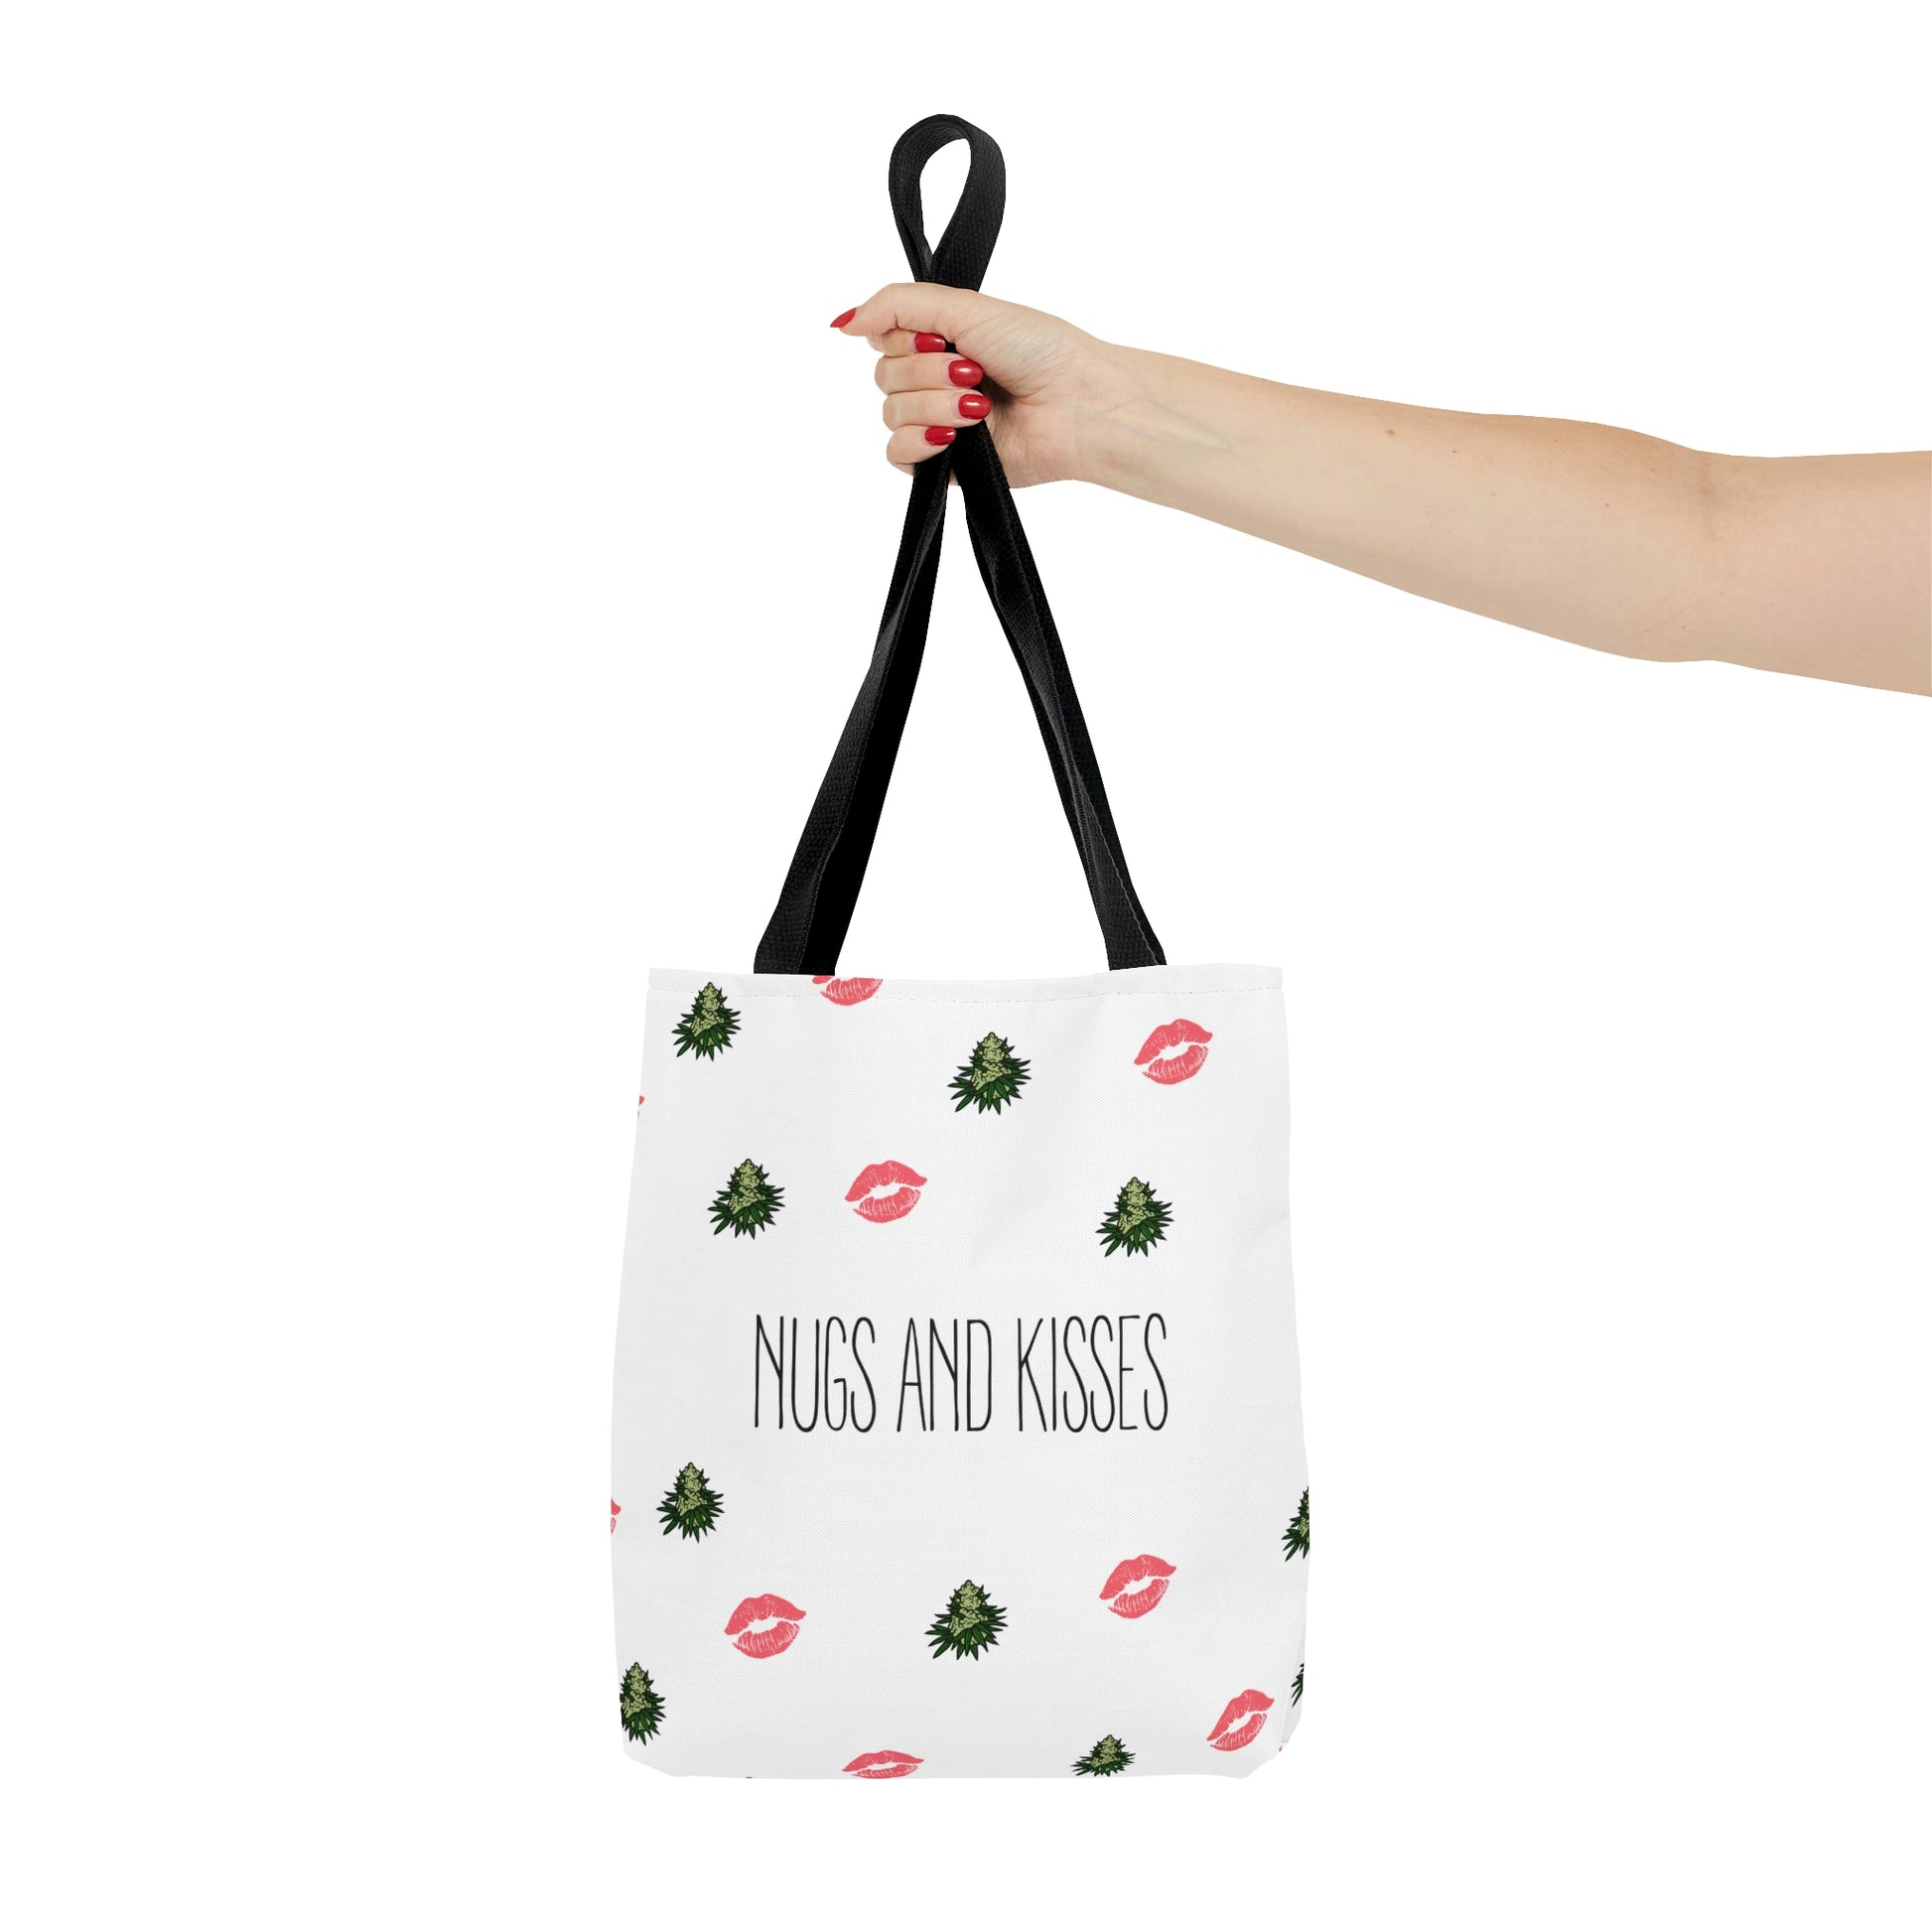 A person is holding the decorative Nugs and Kisses Weed Tote Bag